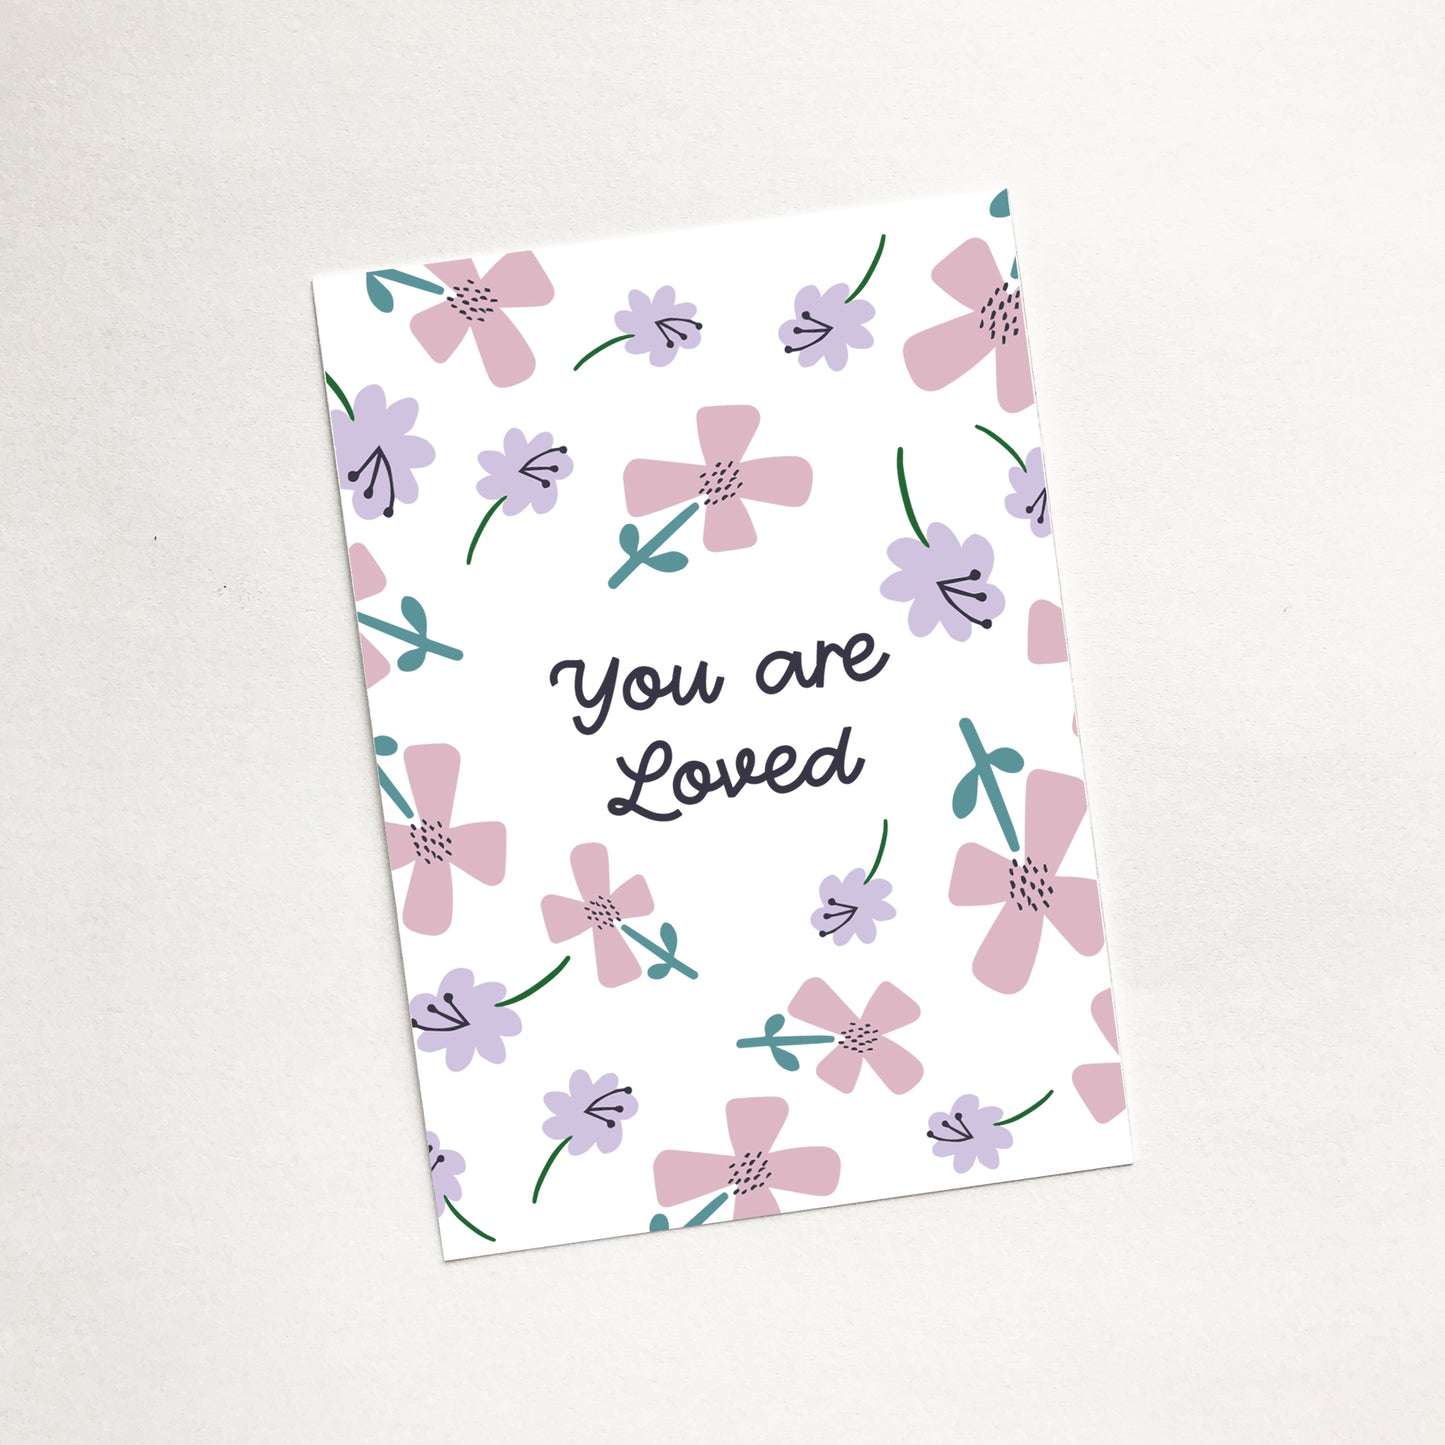 'You are Loved' (Petals) - Christian Mini Card